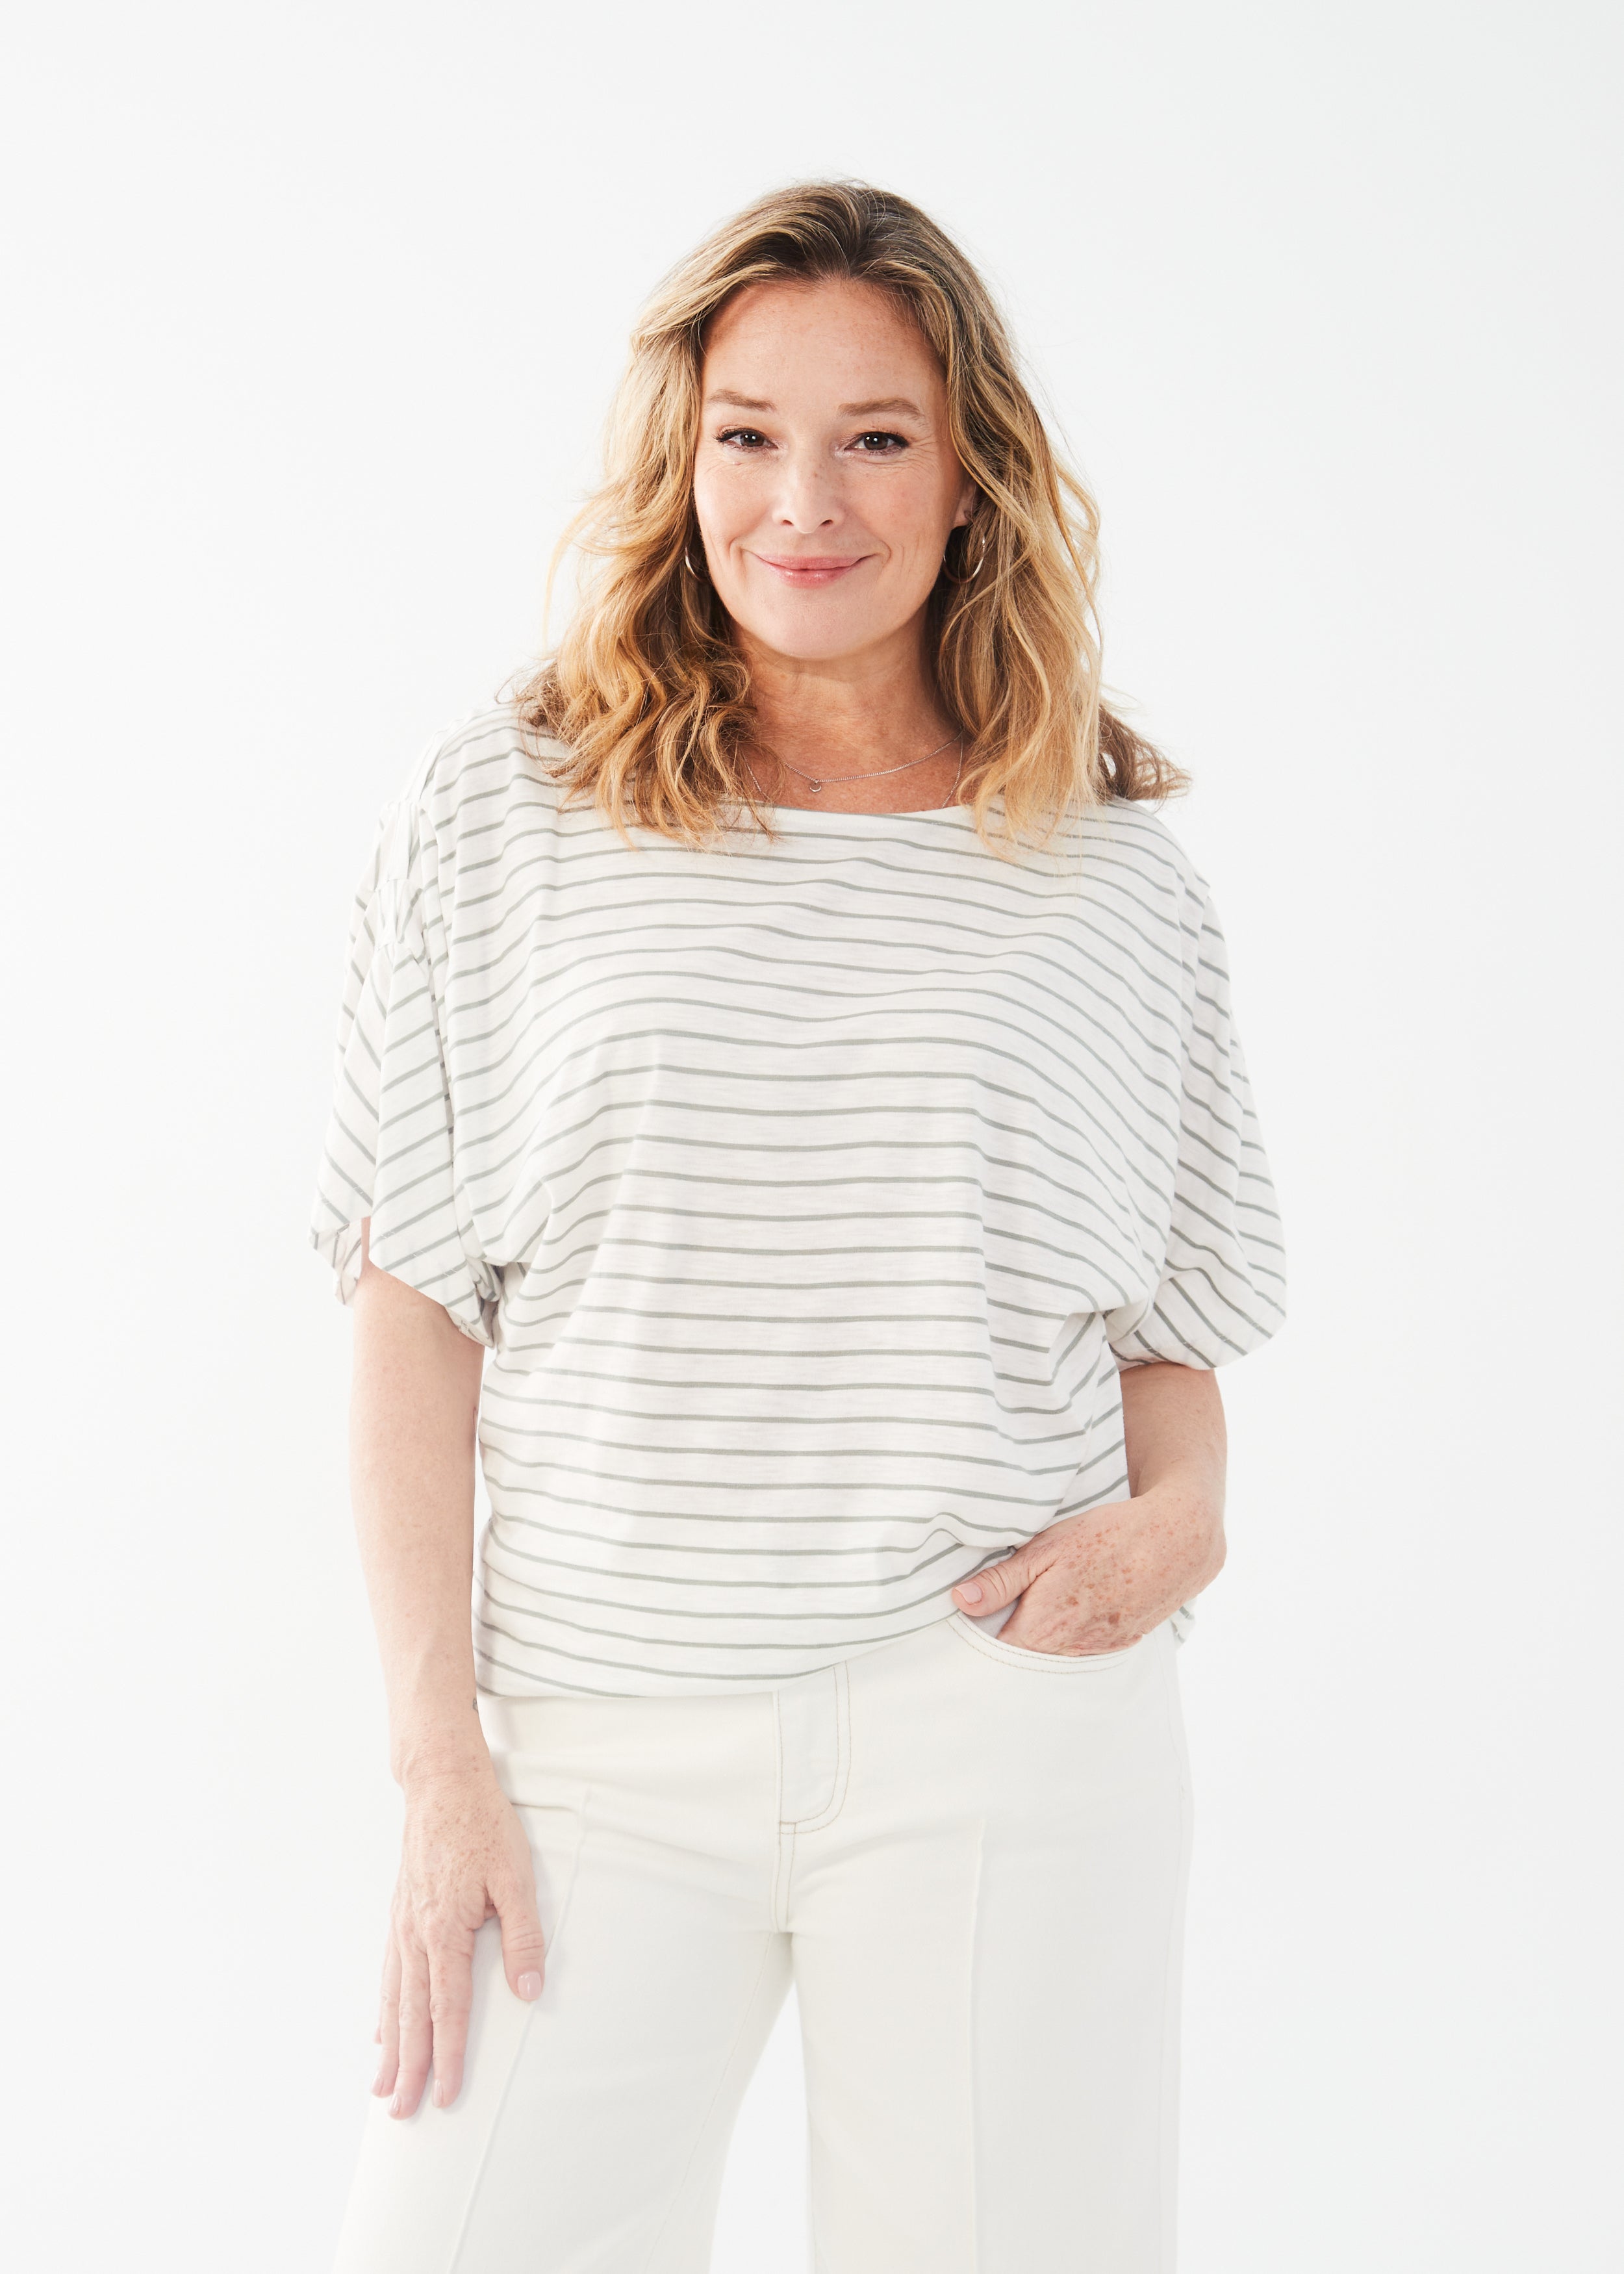 Get ready to set sail in style with the FDJ Boat Neck Elbow Sleeve Top! Made from a luxurious cotton modal blend, this top features a chic fern stripe that will have you looking effortlessly cool. This top is a must-have!